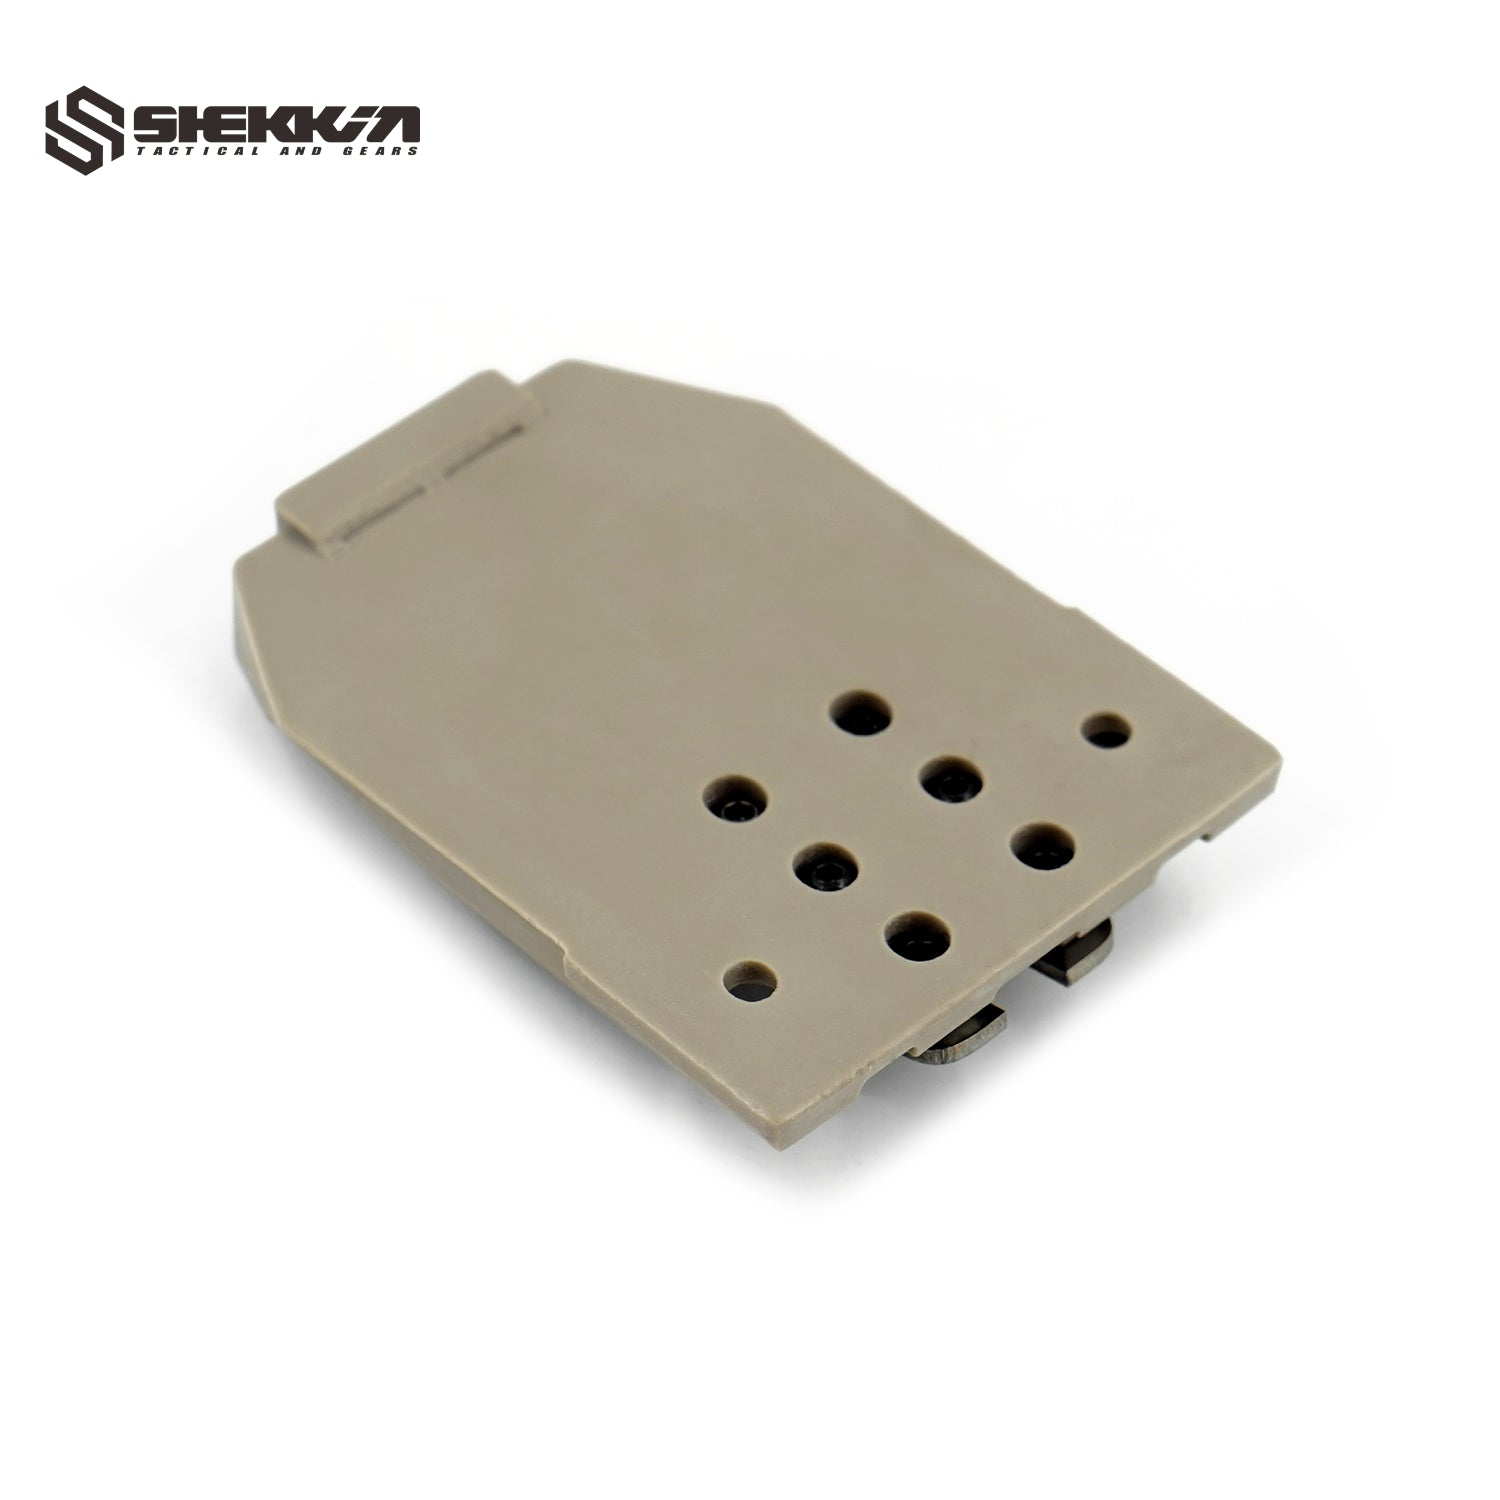 MBS Style Adapter insert for wilcox GSGM - Shekkin Gears